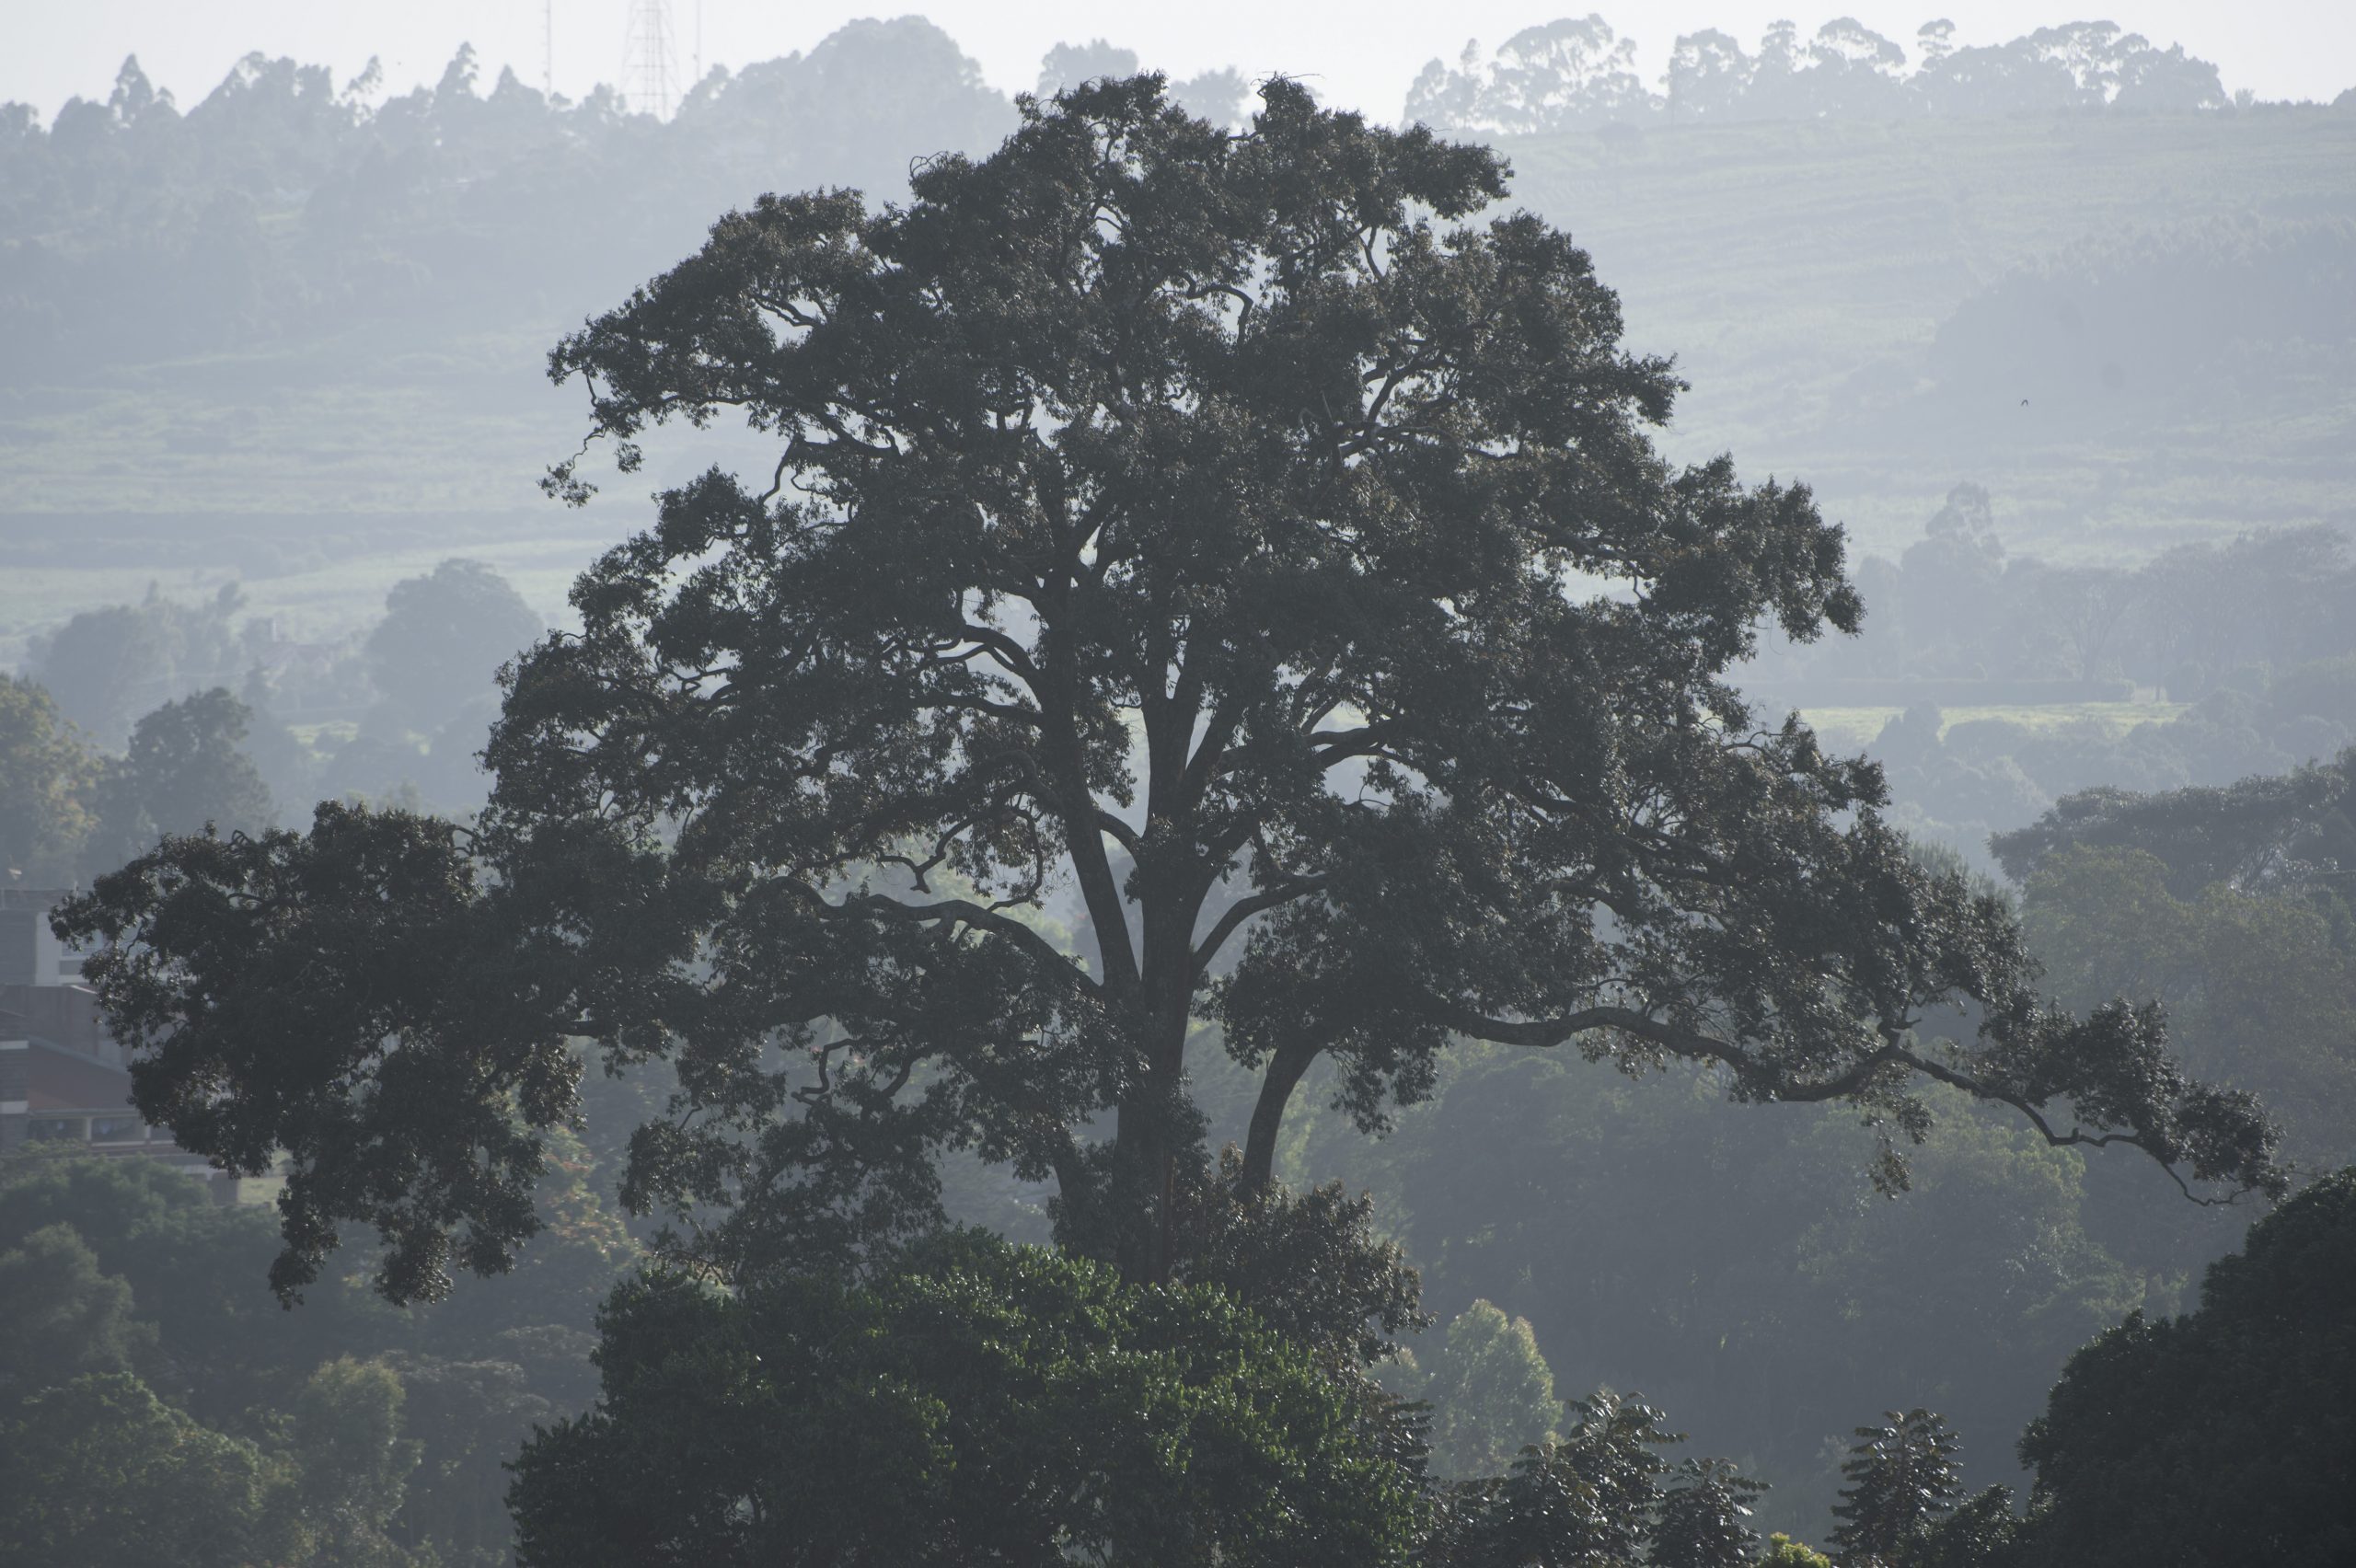 Forest restoration – saving East Africa's rare trees